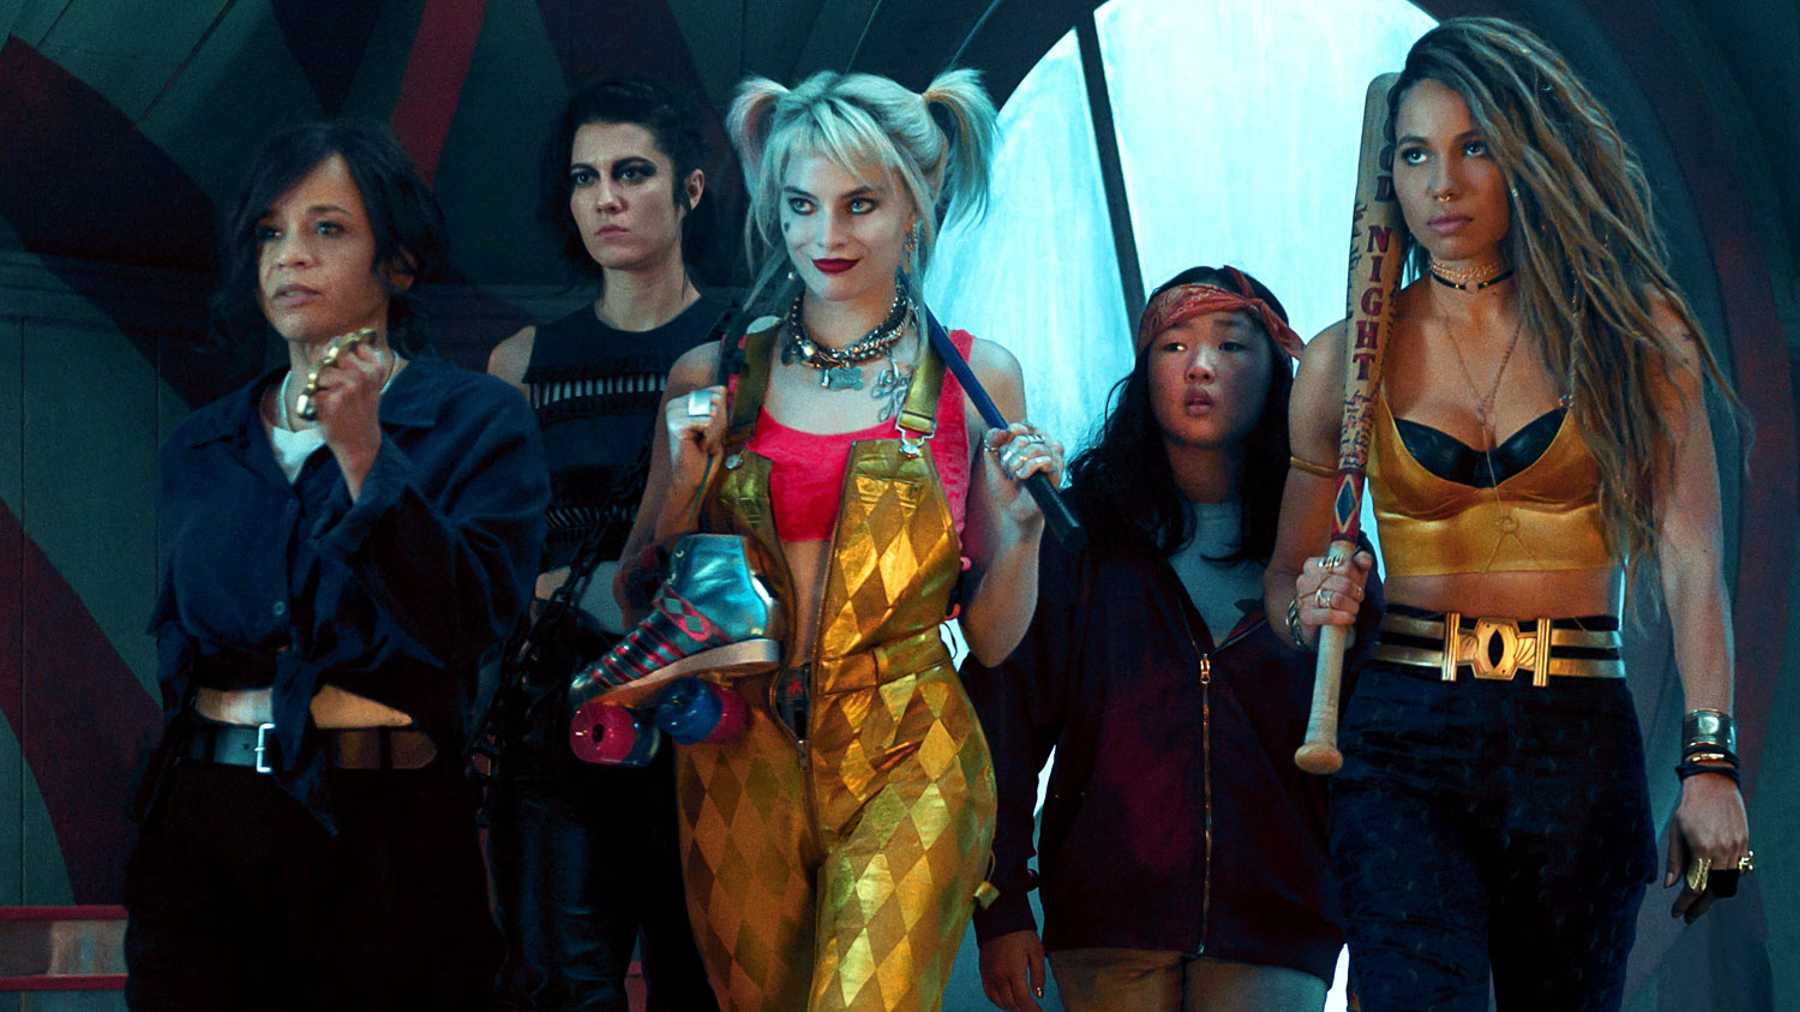 Harley Quinn: Birds of Prey (2020) Harley, Dinah, Helena, Montoya and Cass in action